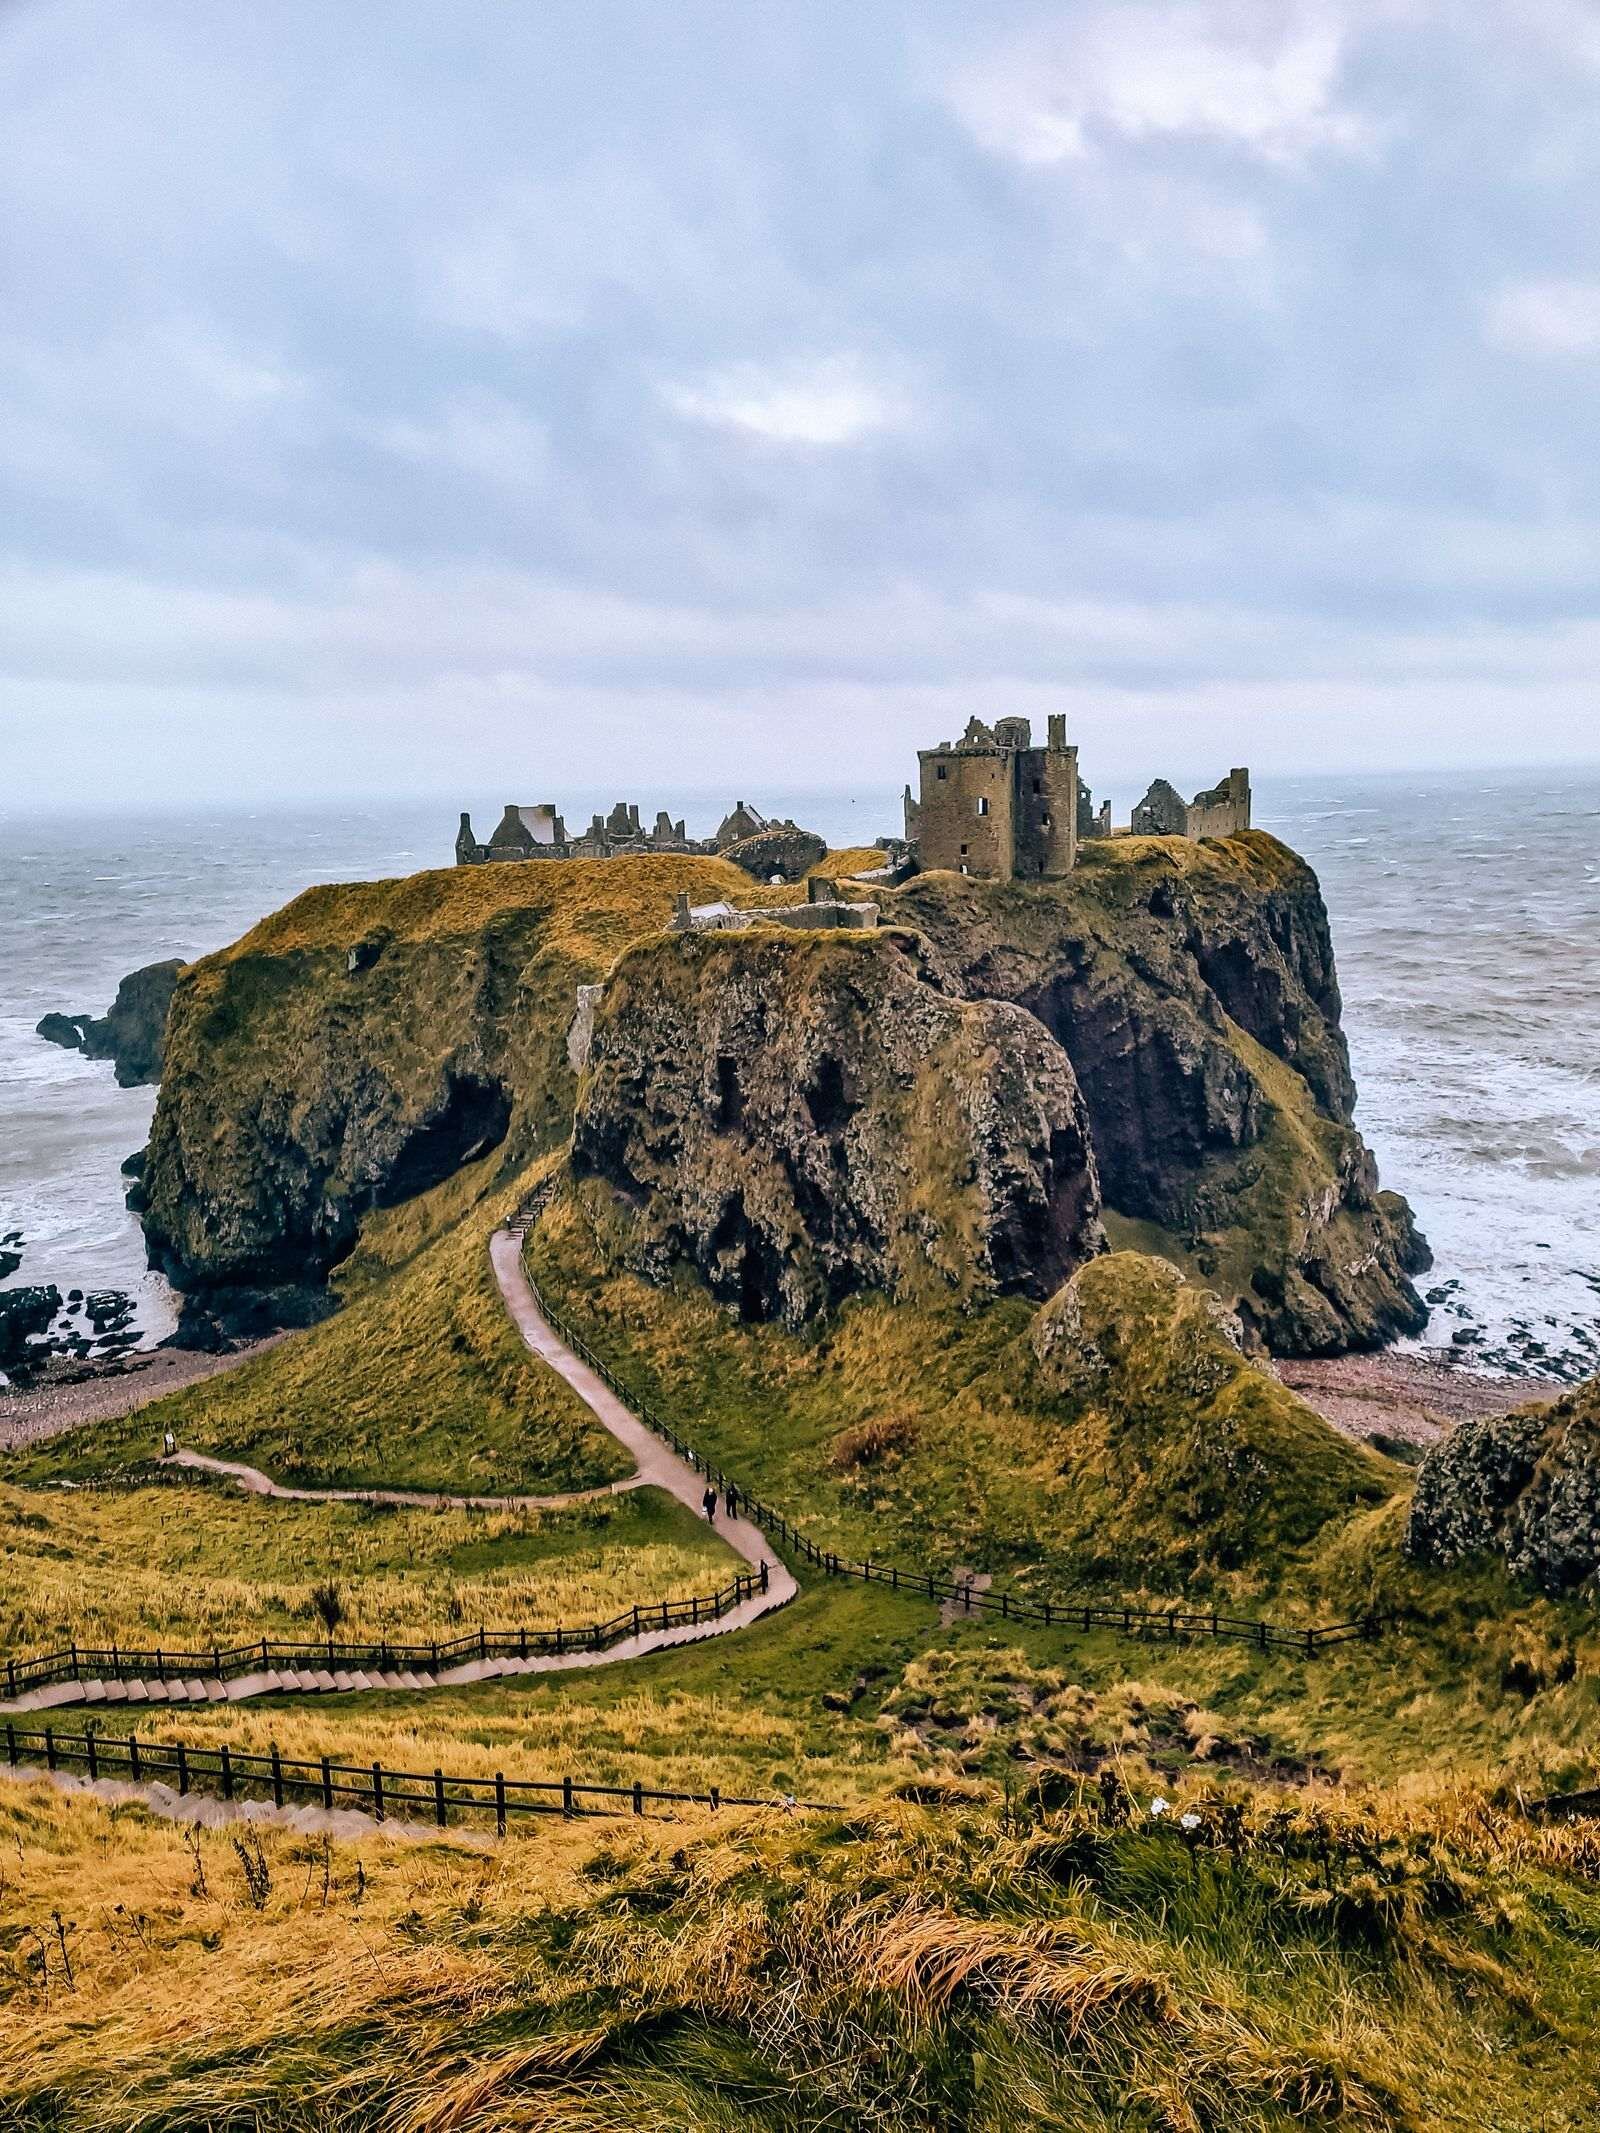 Dunnottar Castle ruins on a rocky outcrop surrounded by grey sea with a single path on a rocky, grassy slope leading to the castle